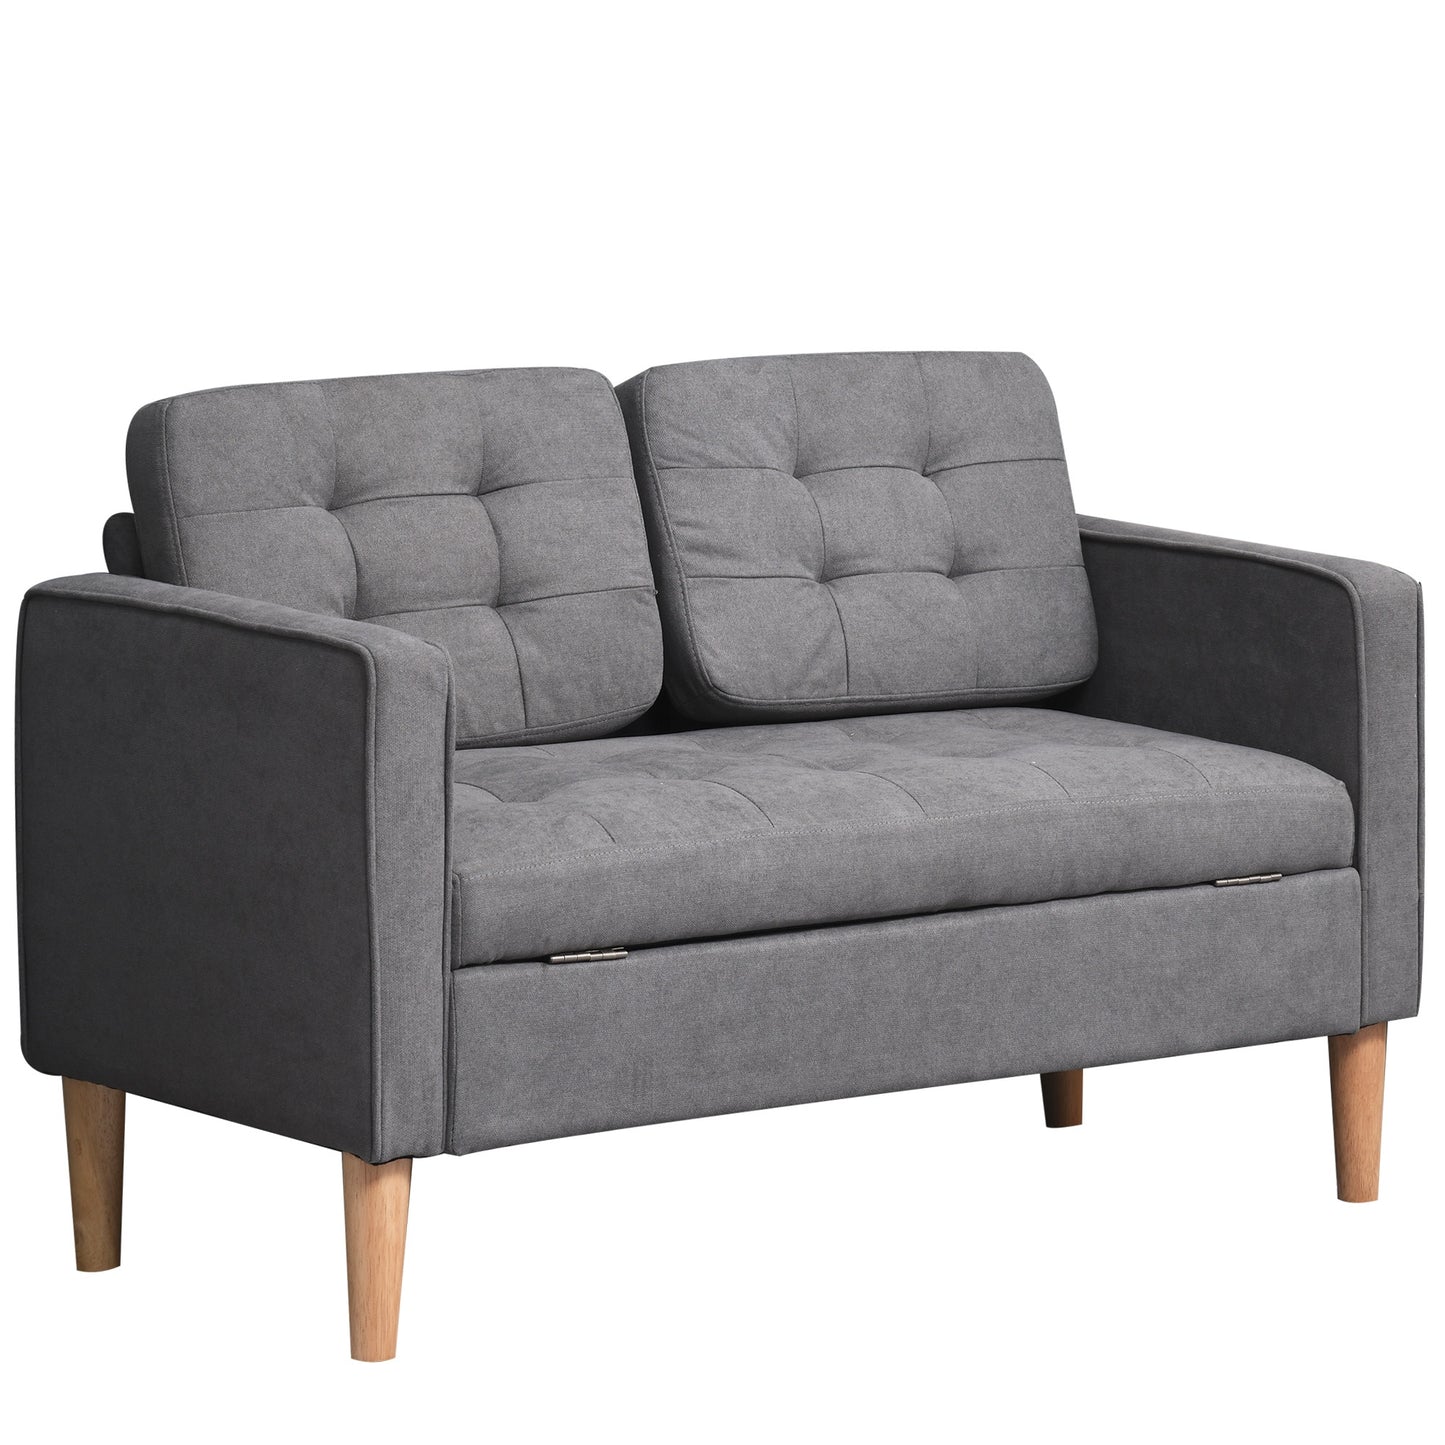 HOMCOM Modern Loveseat Sofa Button-Tufted Fabric Couch with Storage Chest Wood Legs